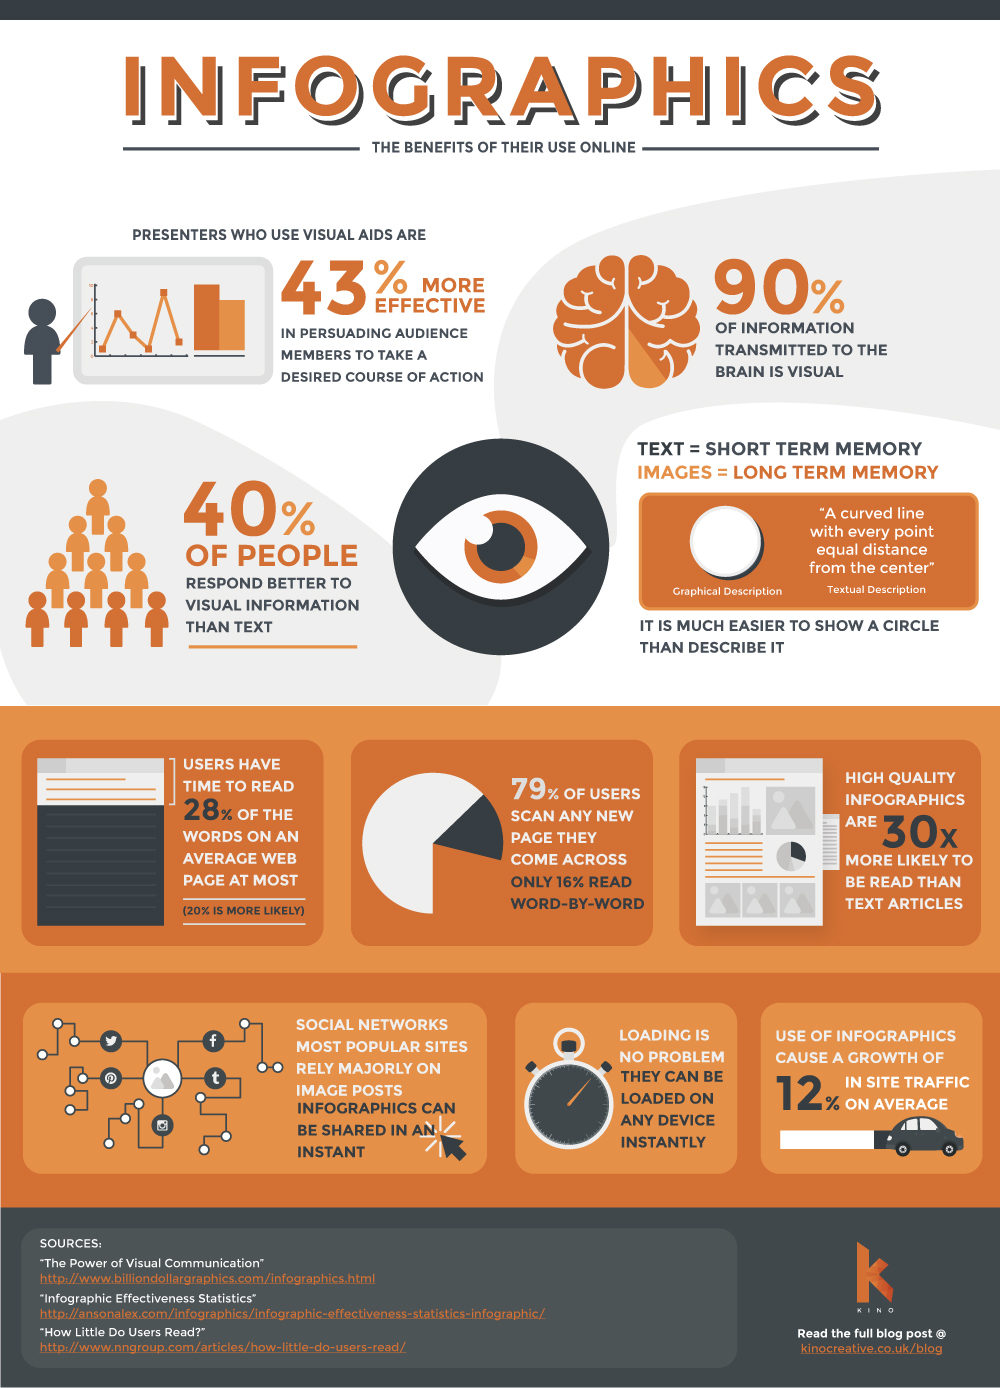 The benefits of infographics online by Visually